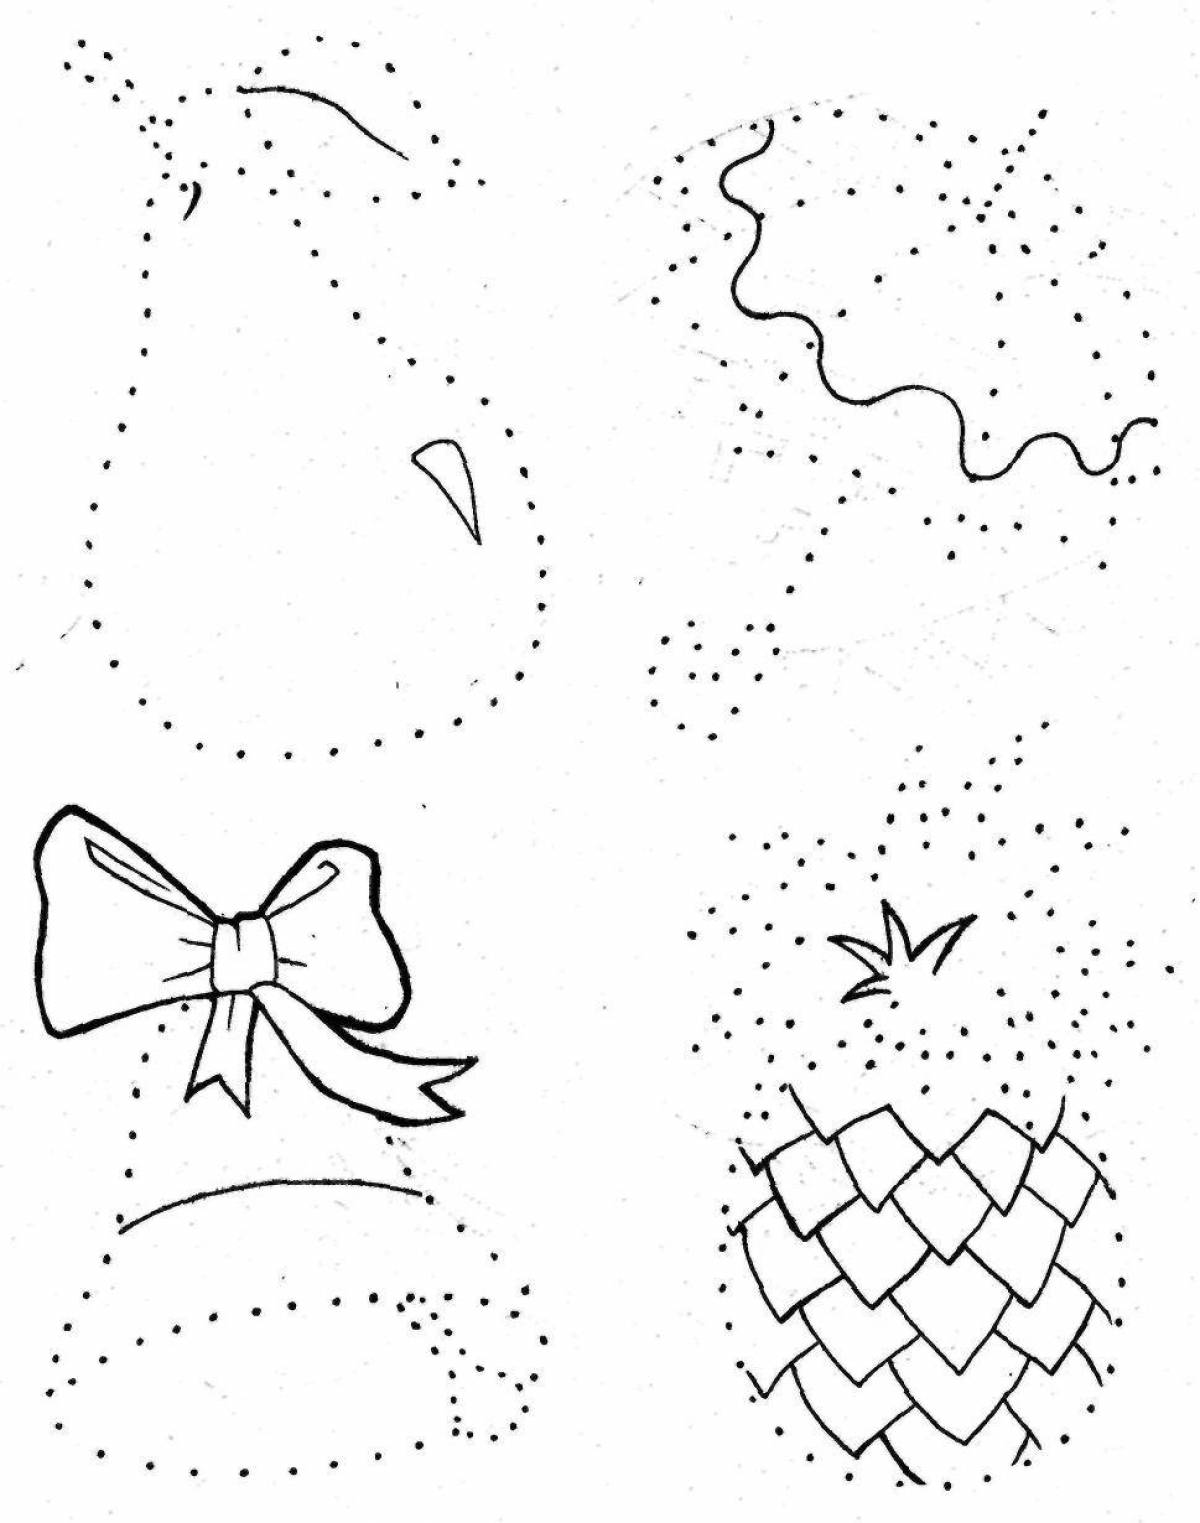 Live Dot Coloring for Toddlers